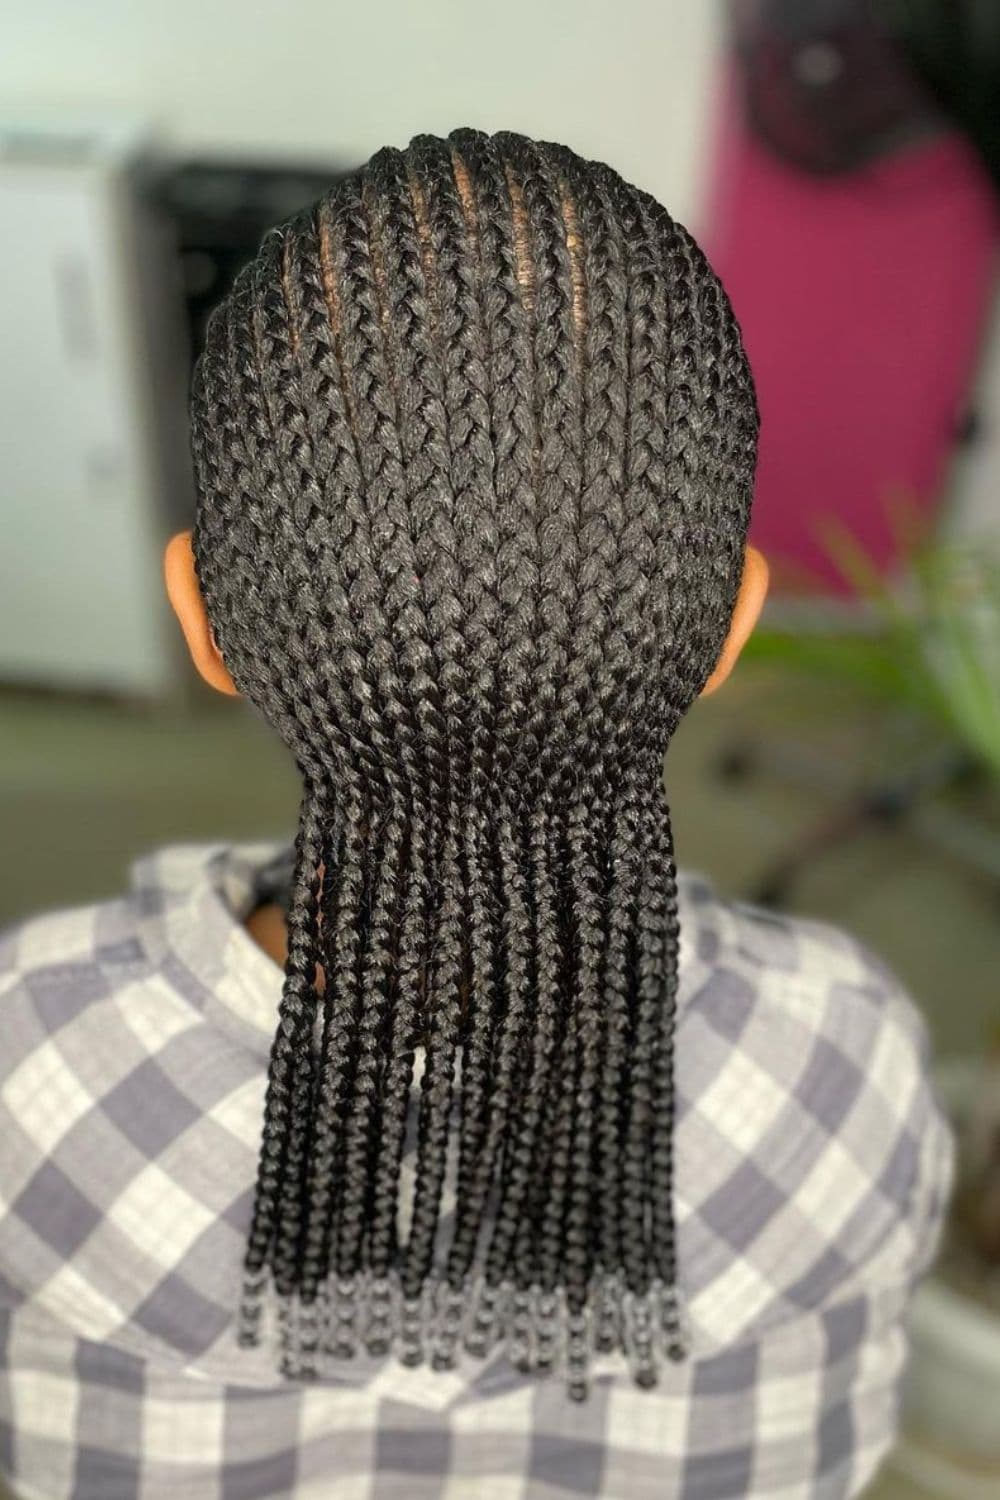 A person with black mid-length cornrows with beads.